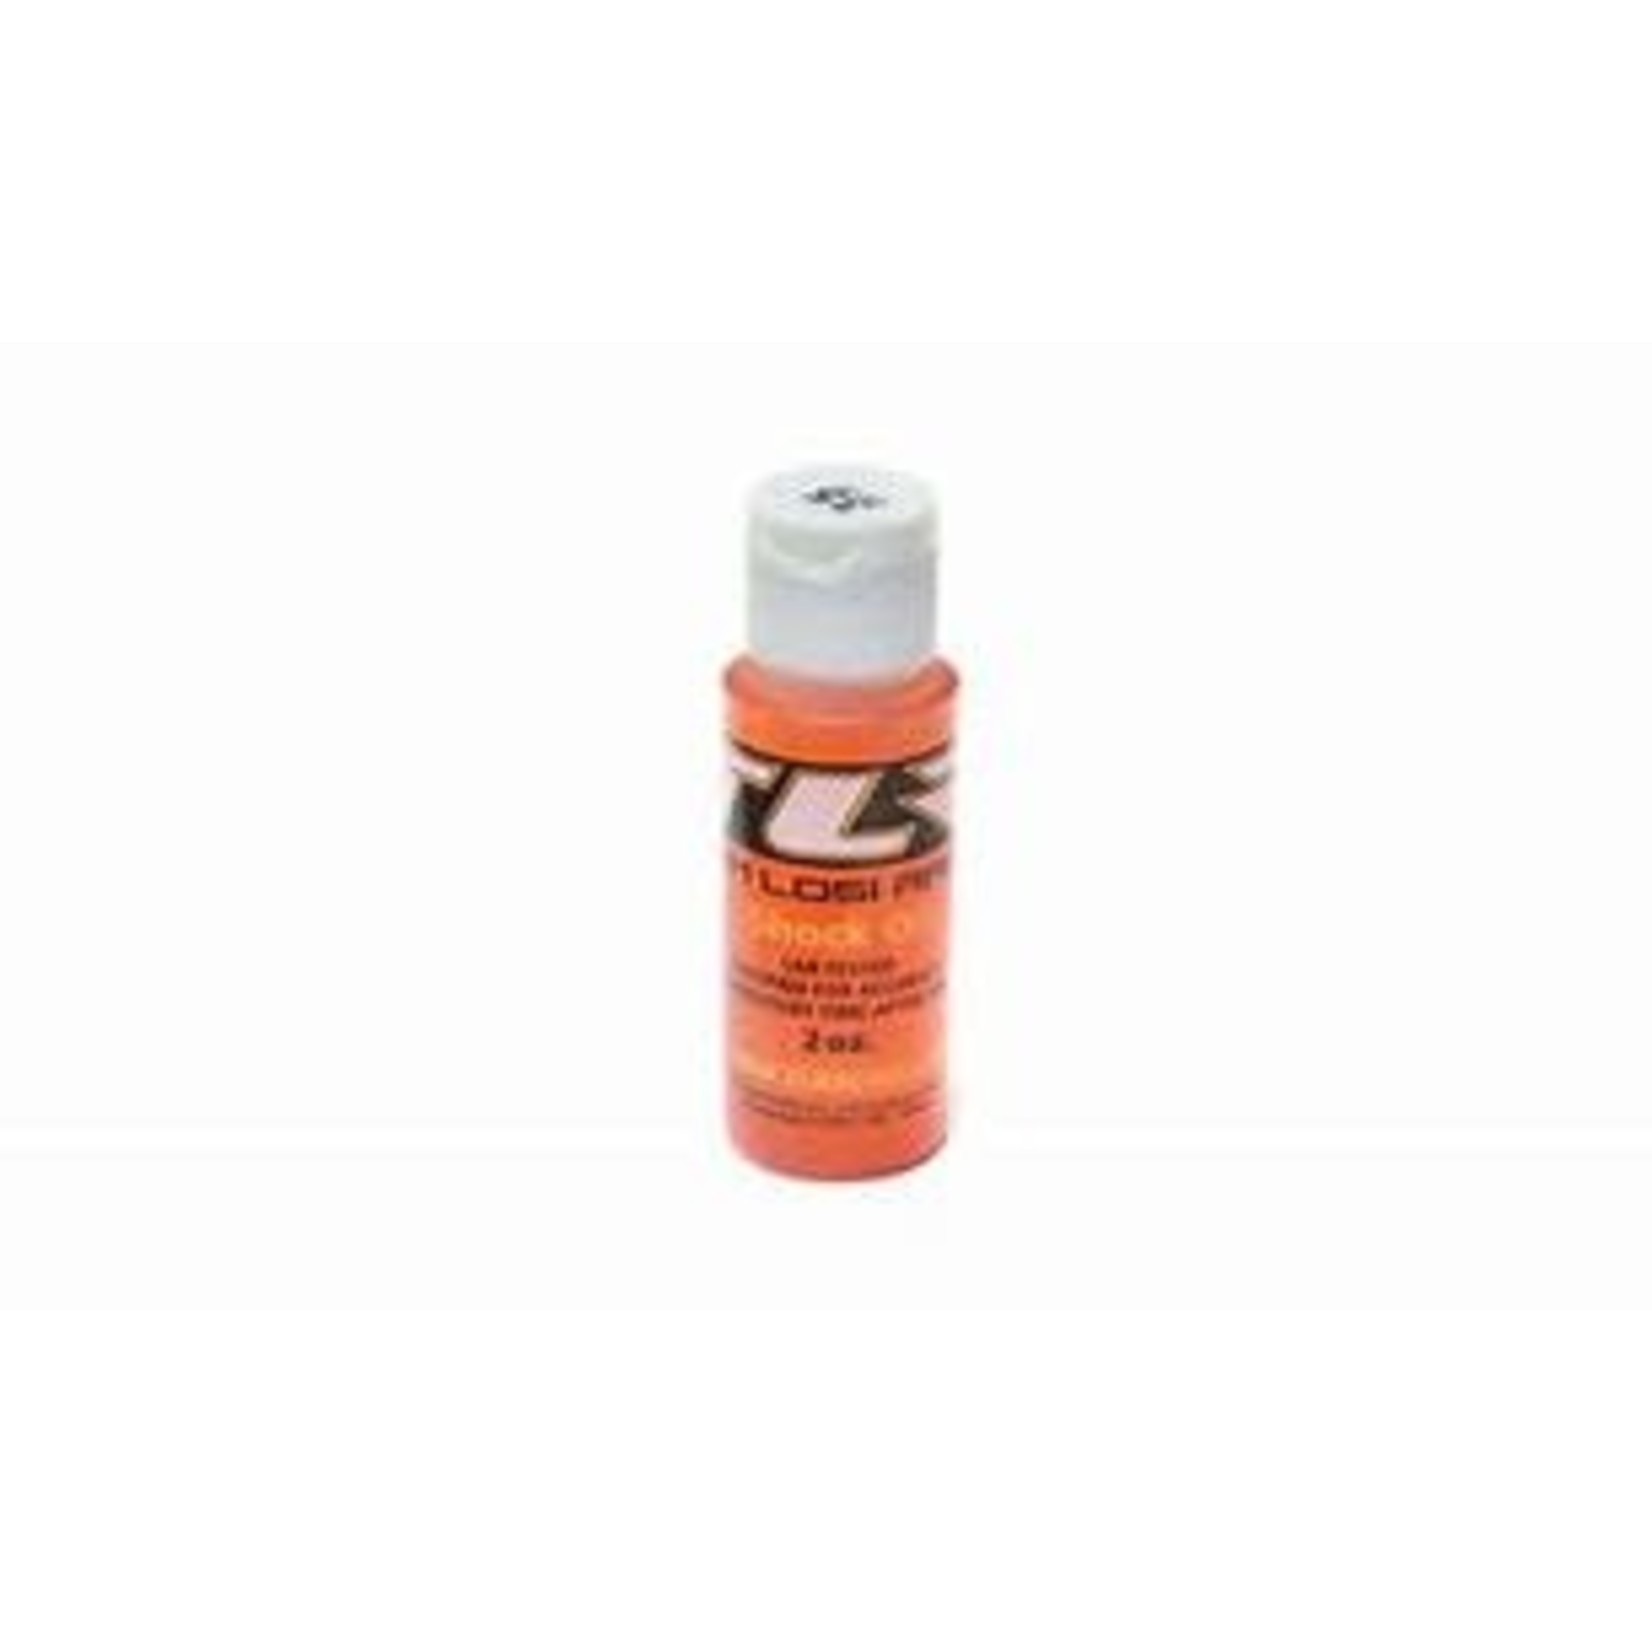 Team Losi Racing (TLR) Silicone Shock Oil, 70WT, 910CST, 2oz